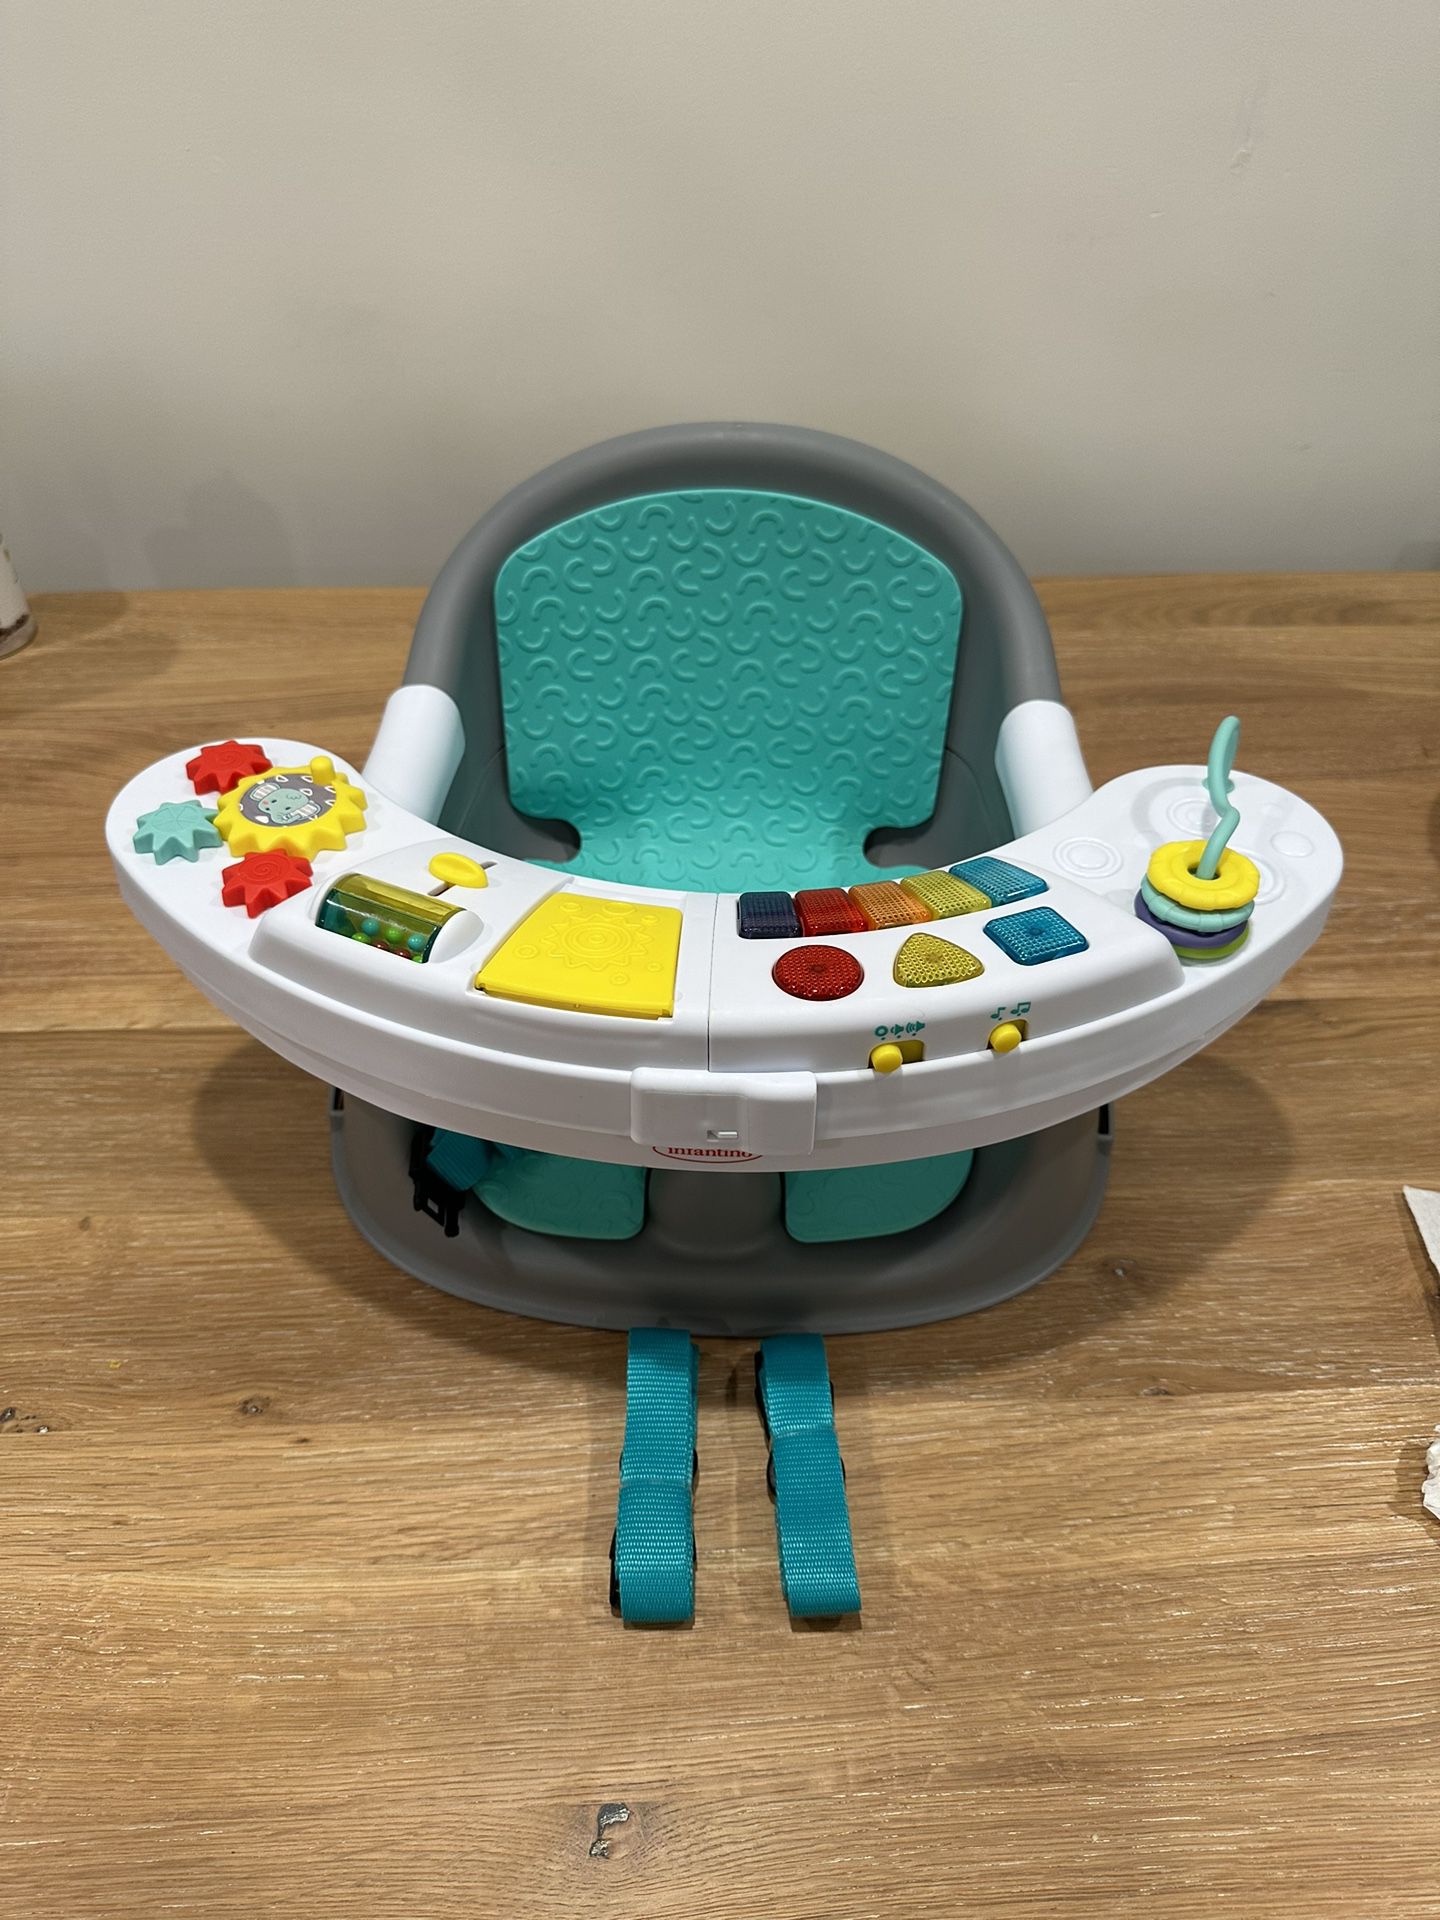 Infantino Booster Seat 